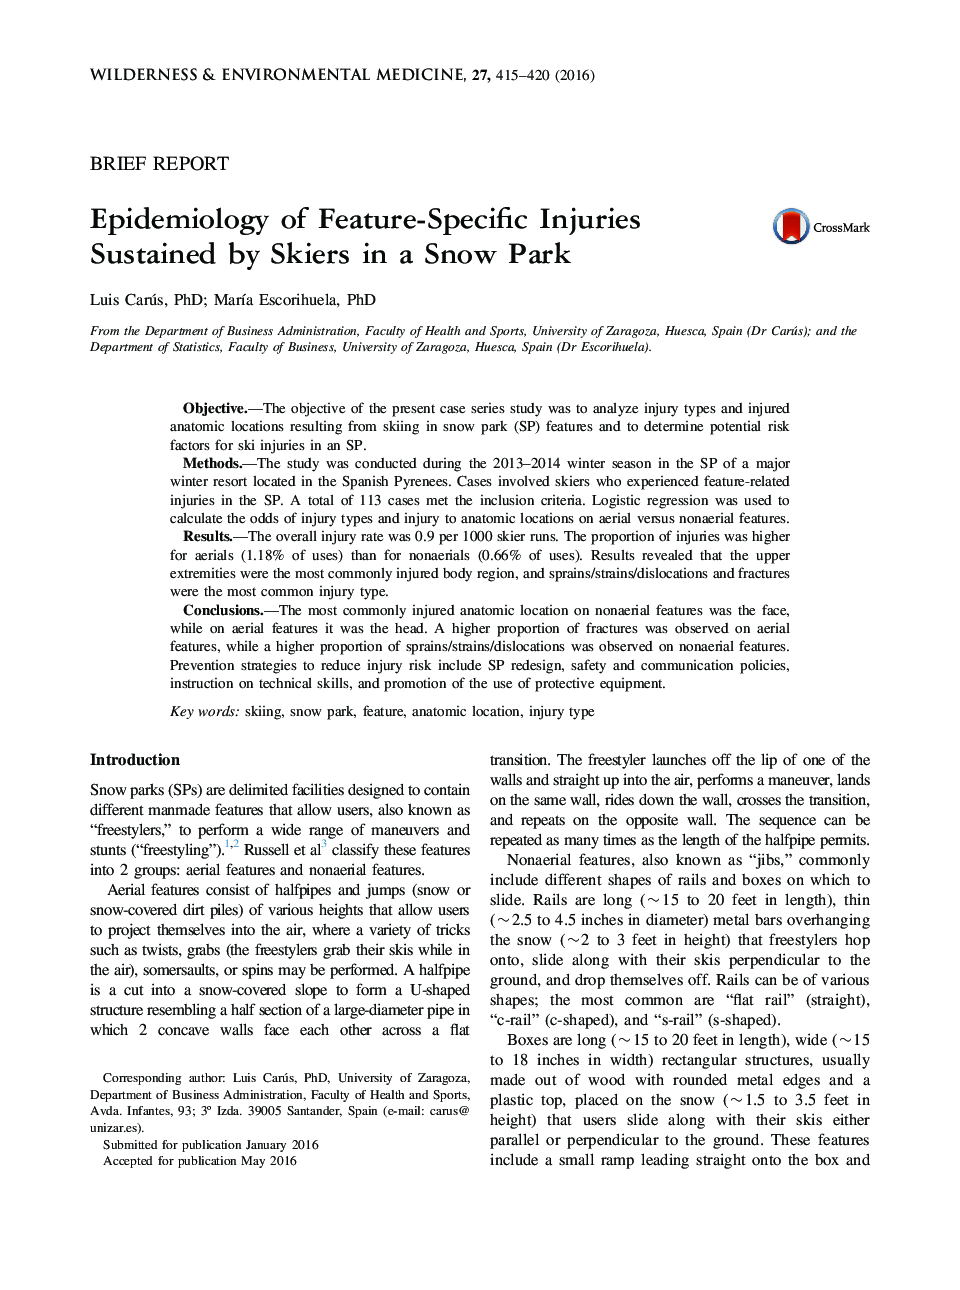 Epidemiology of Feature-Specific Injuries Sustained by Skiers in a Snow Park 